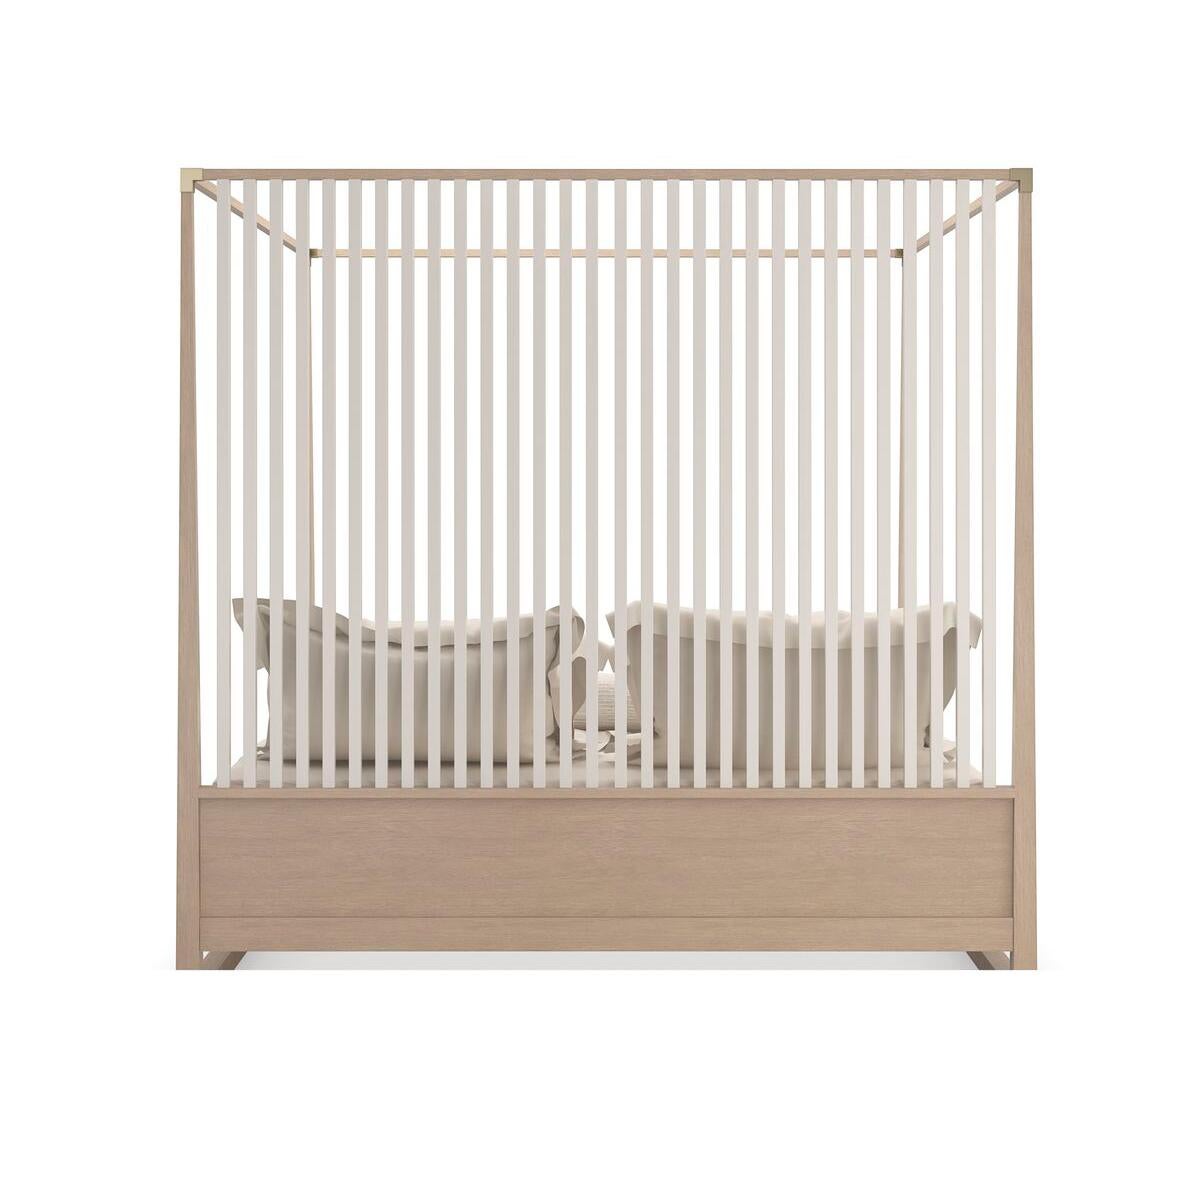 With a dramatic vertical slat back design. It has an architecturally inspired design and is an updated take on the classic canopy bed. With a canopy and posts framed in Sundrenched quarter-sawn oak, its architectural design is emphasized by